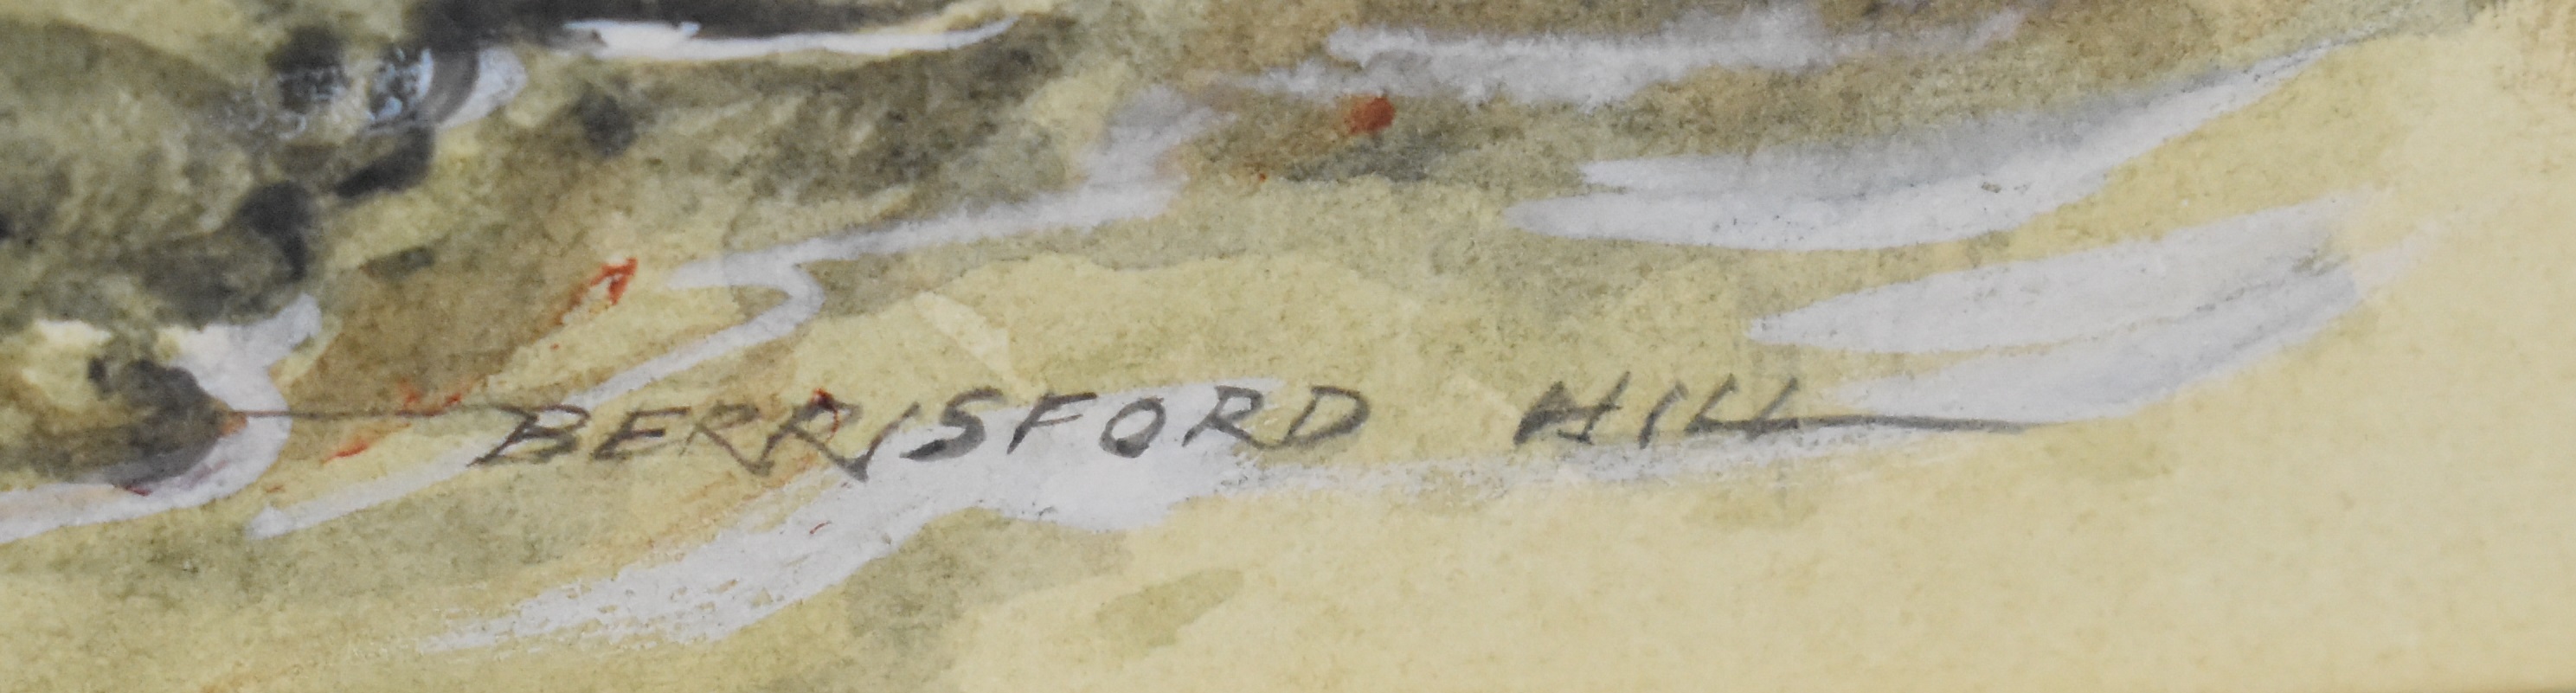 Berrisford Hill (born 1930) watercolour study of ducks on a mud bank, signed lower right, in gilt - Image 3 of 4